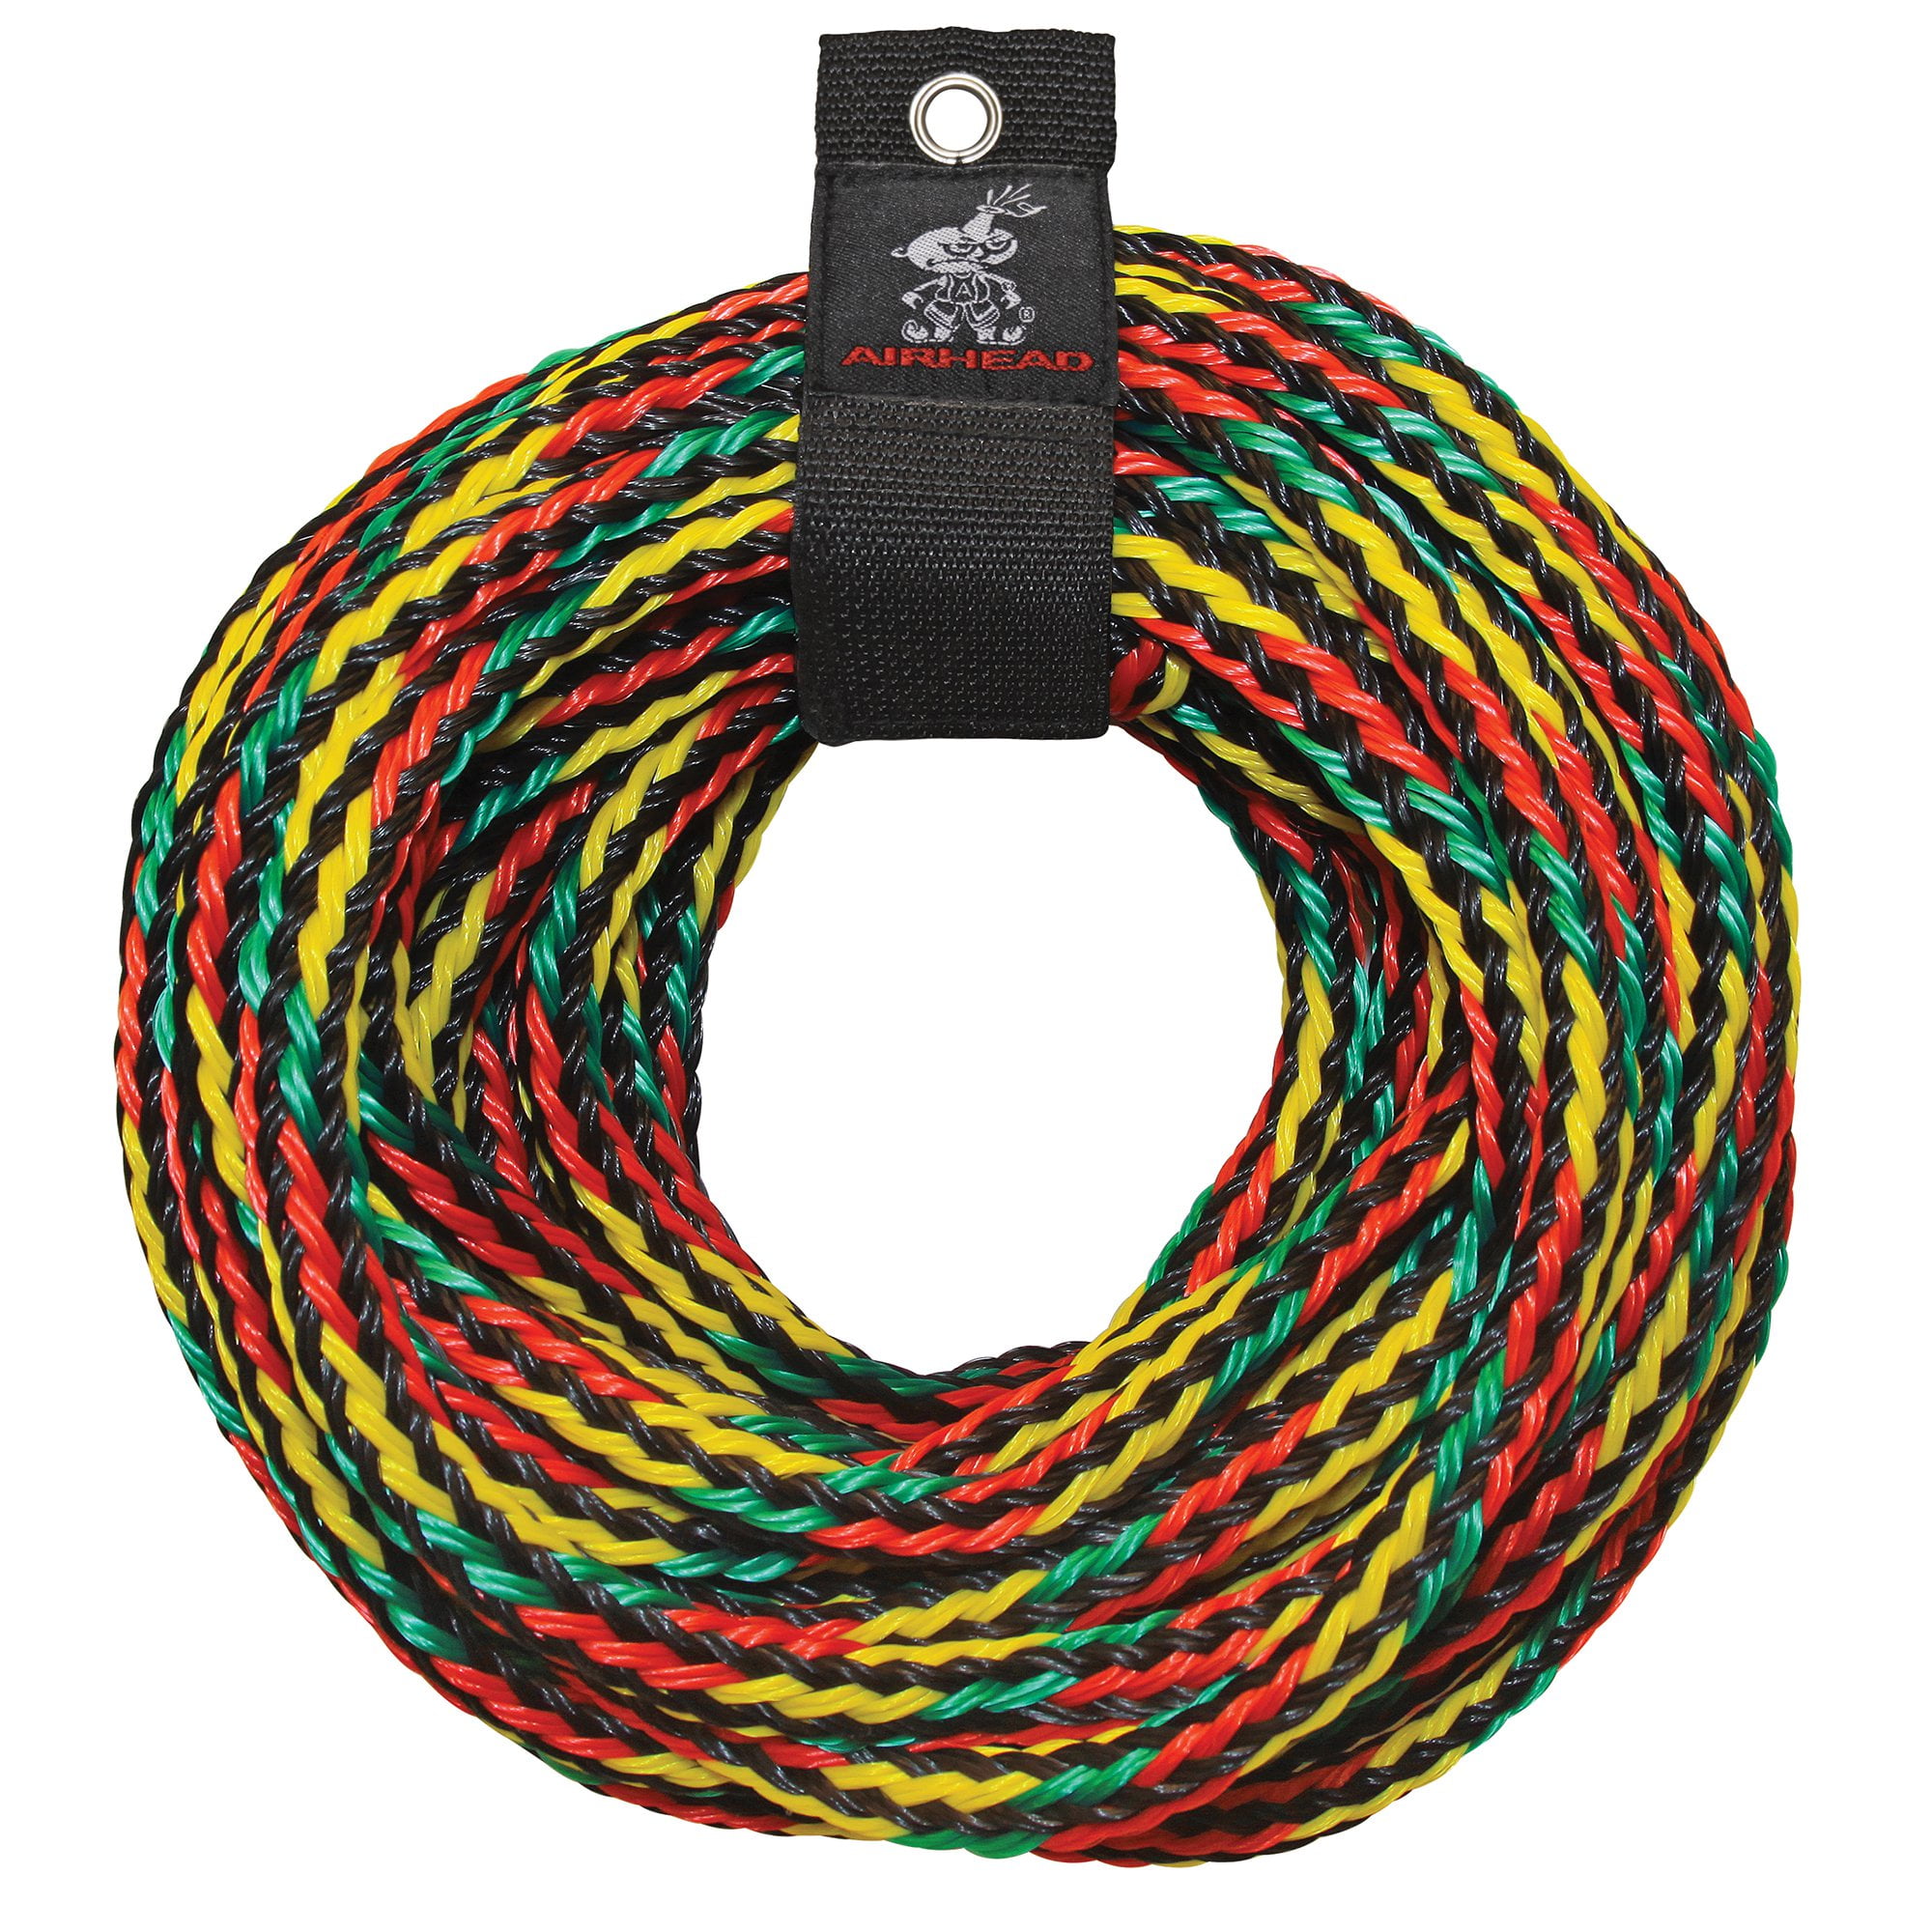 Airhead AHTR-4000 4 Rider Tube Rope for sale online 